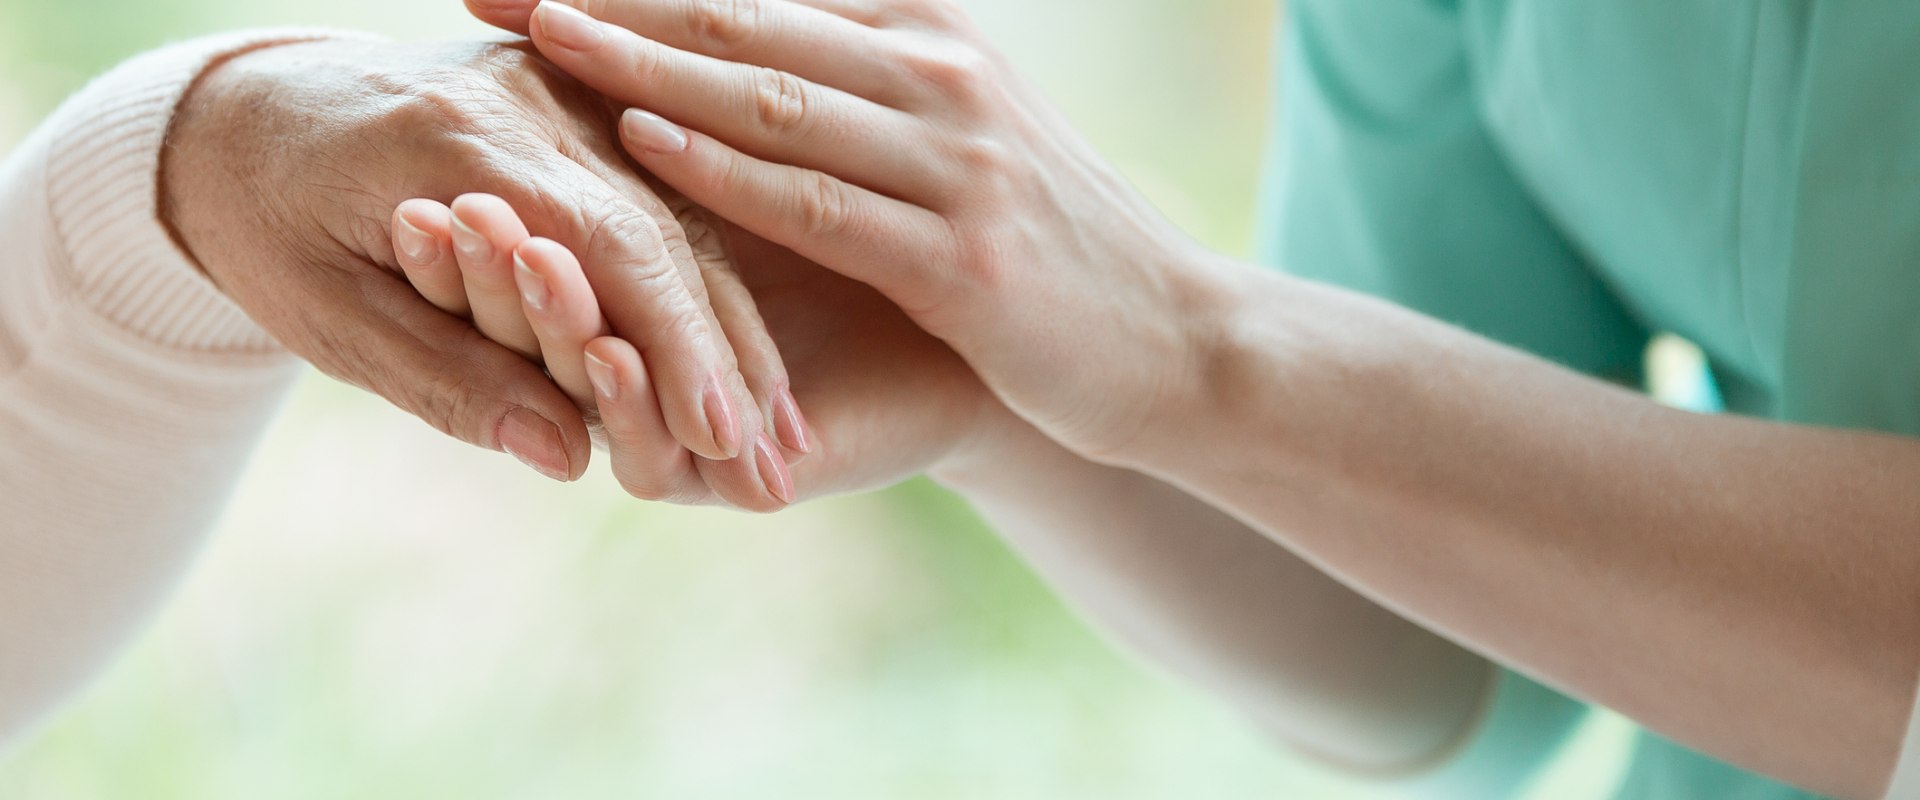 What are the main components of hospice care?